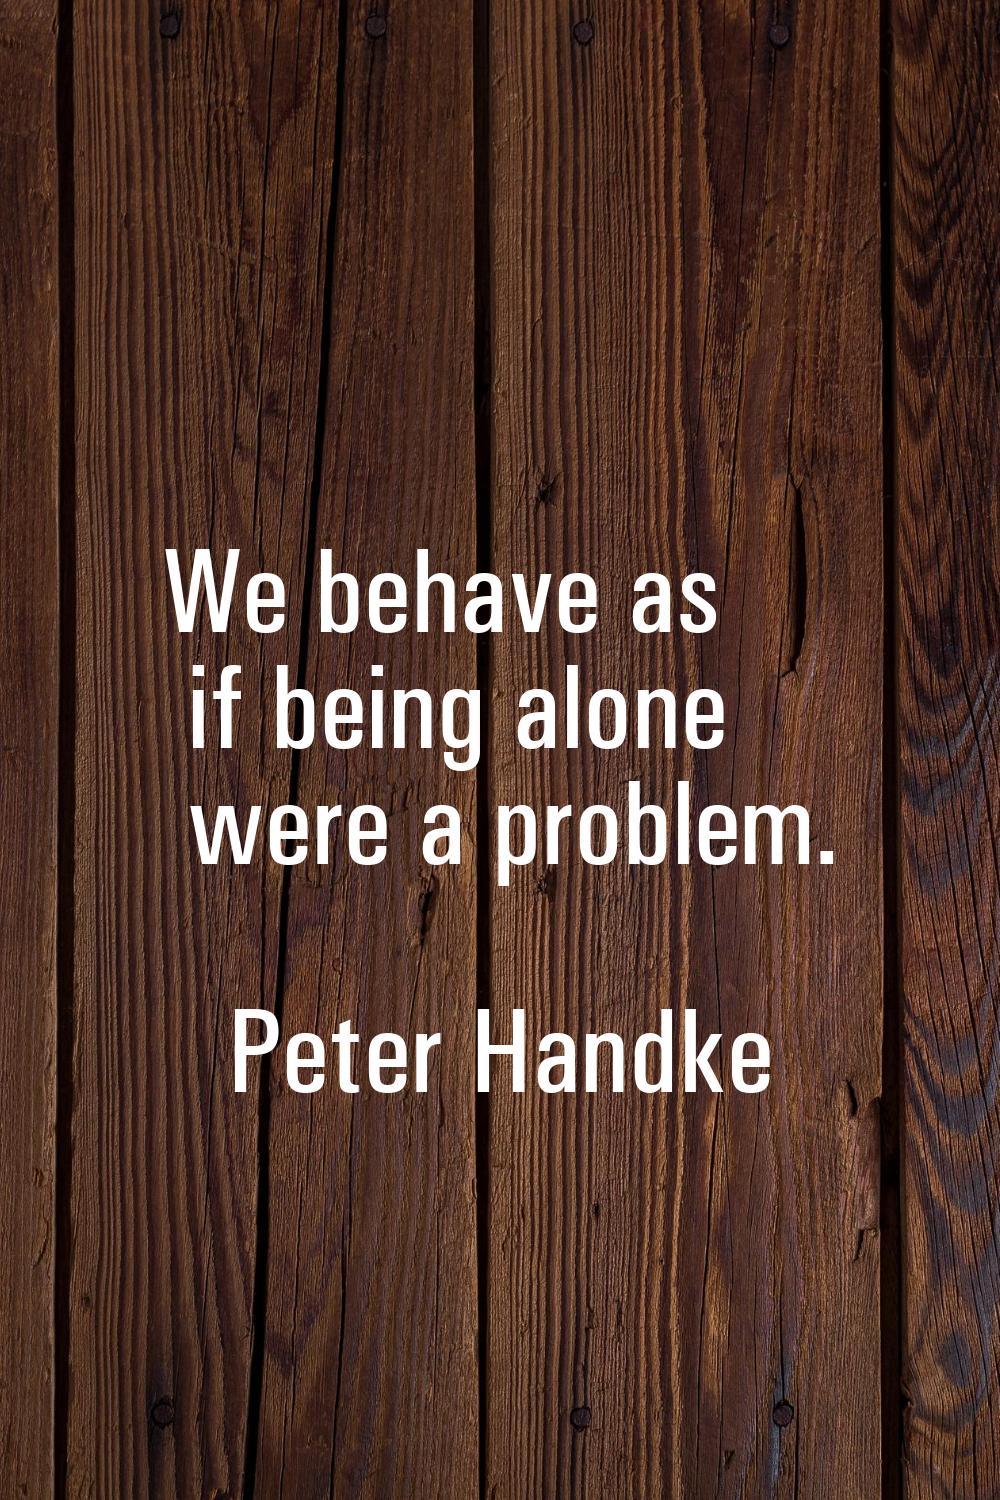 We behave as if being alone were a problem.